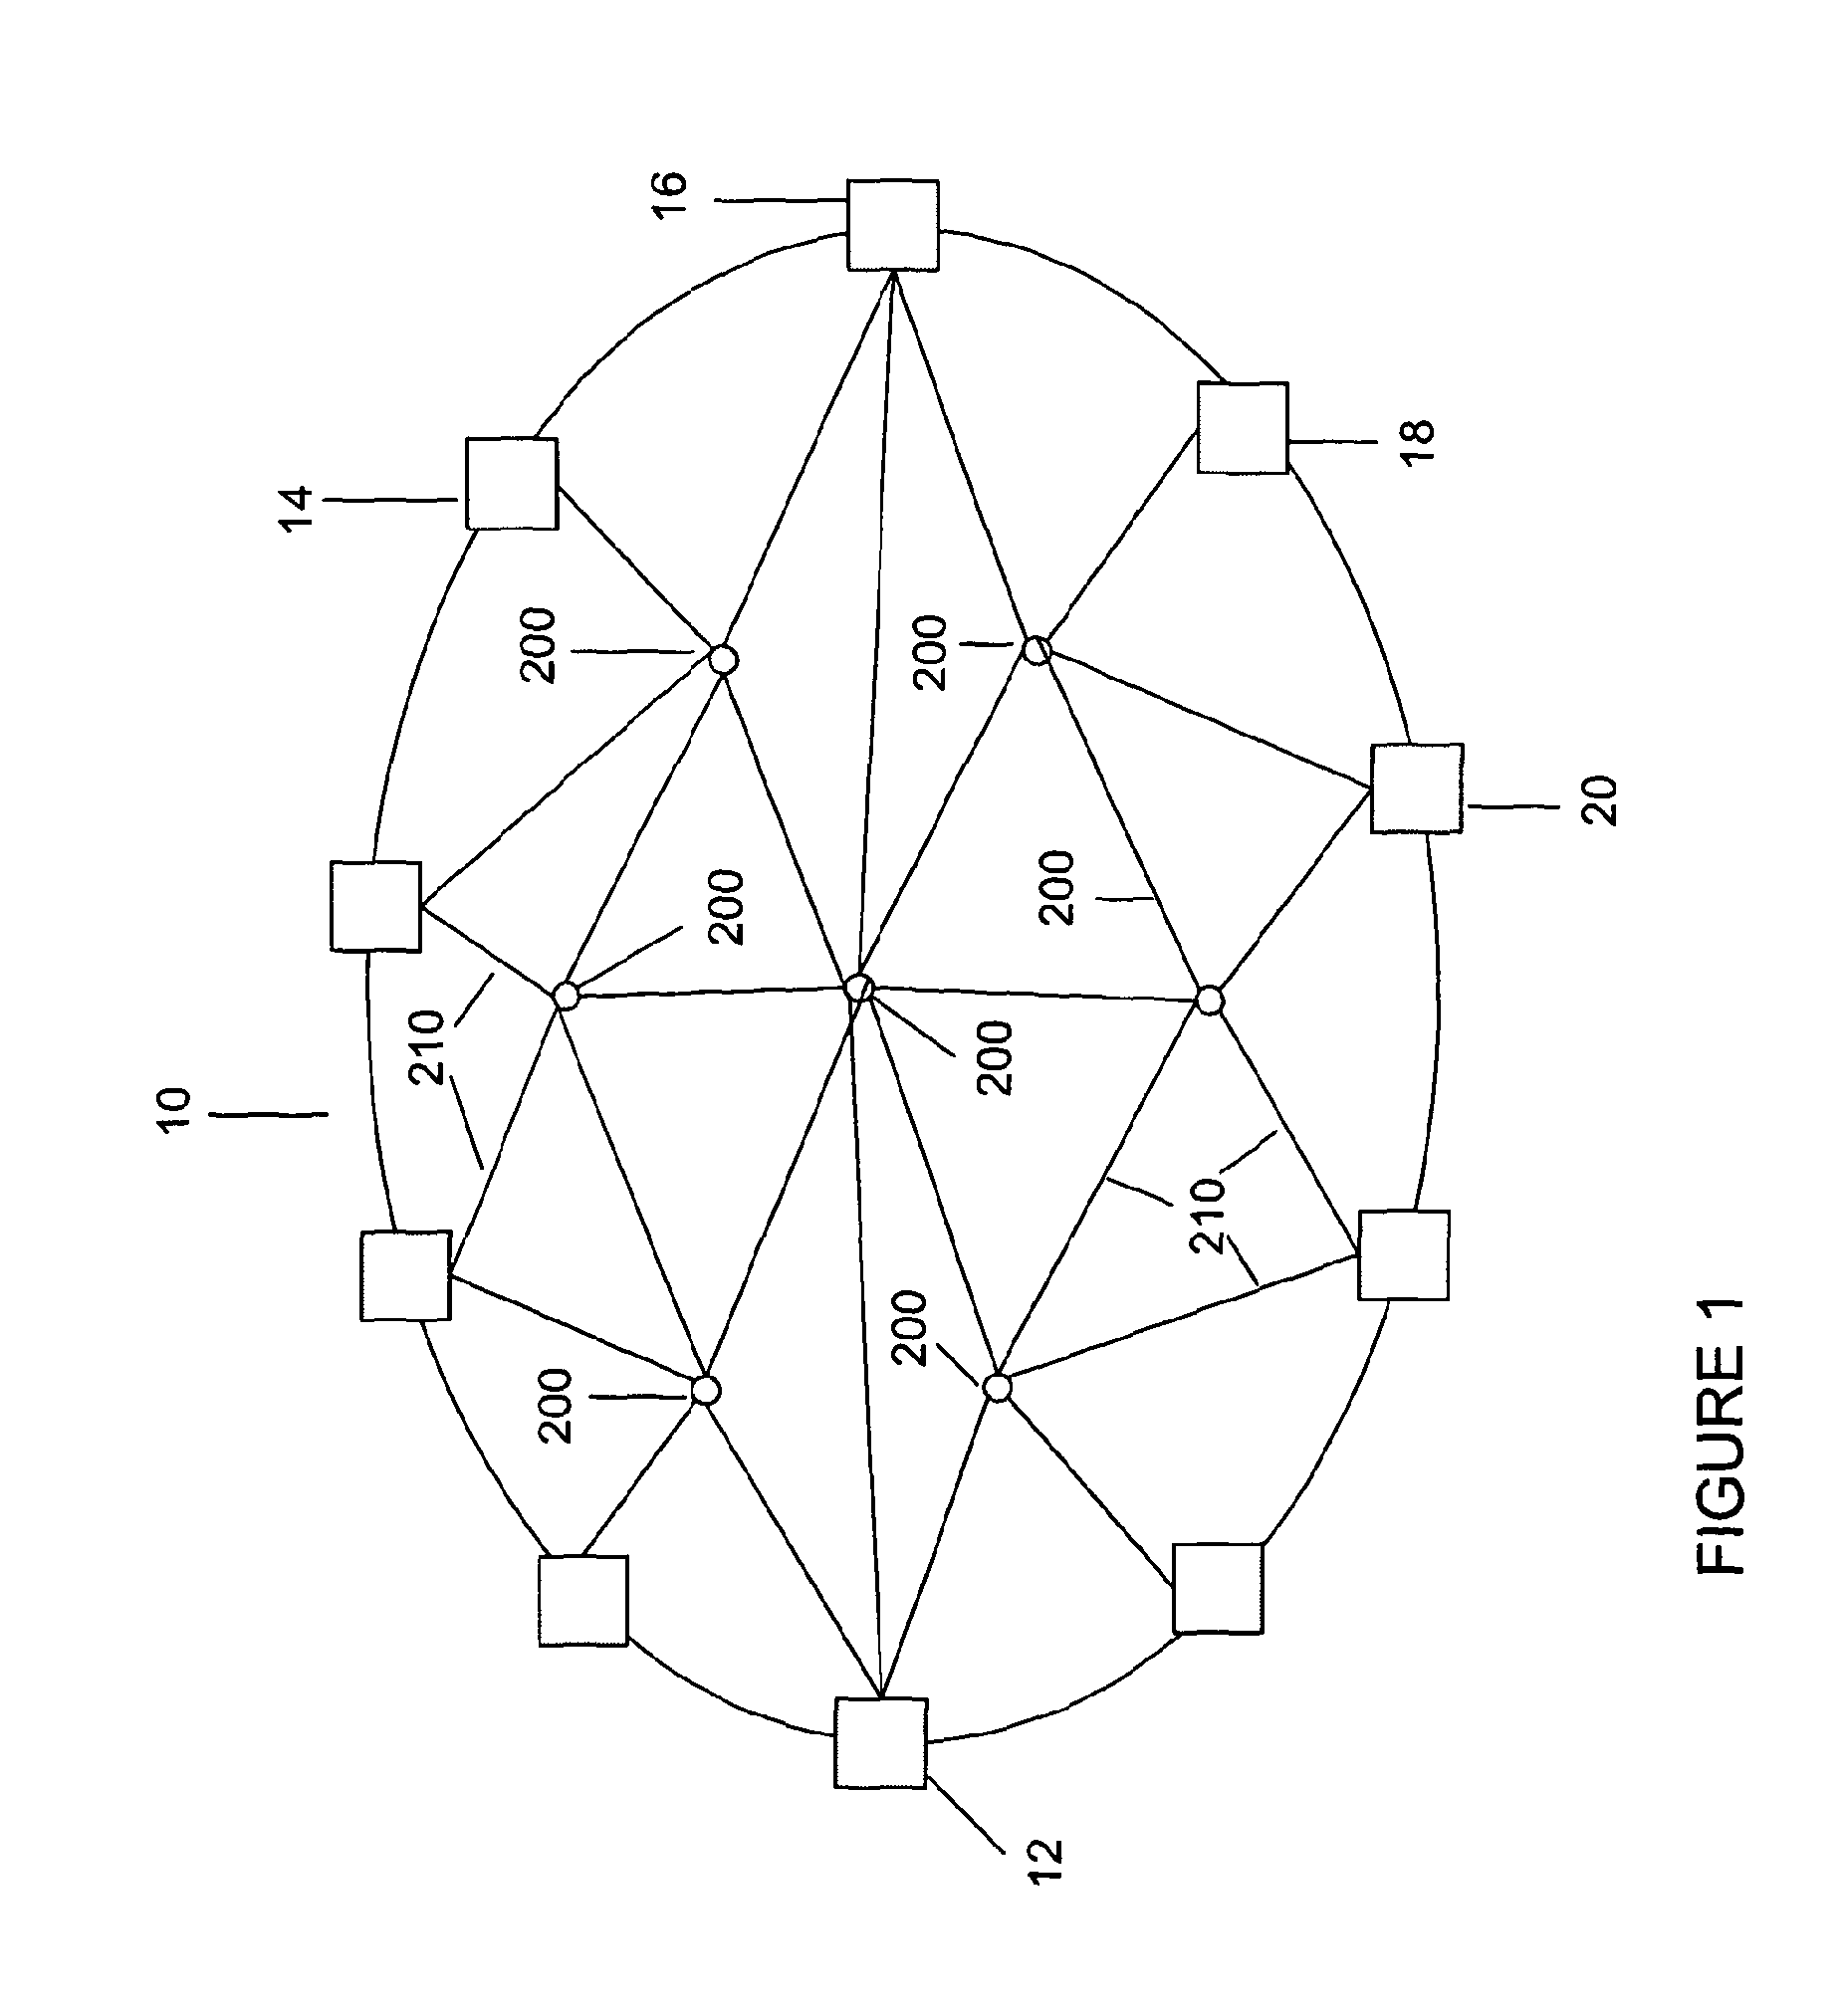 Capacity adaptation between services or classes in a packet network